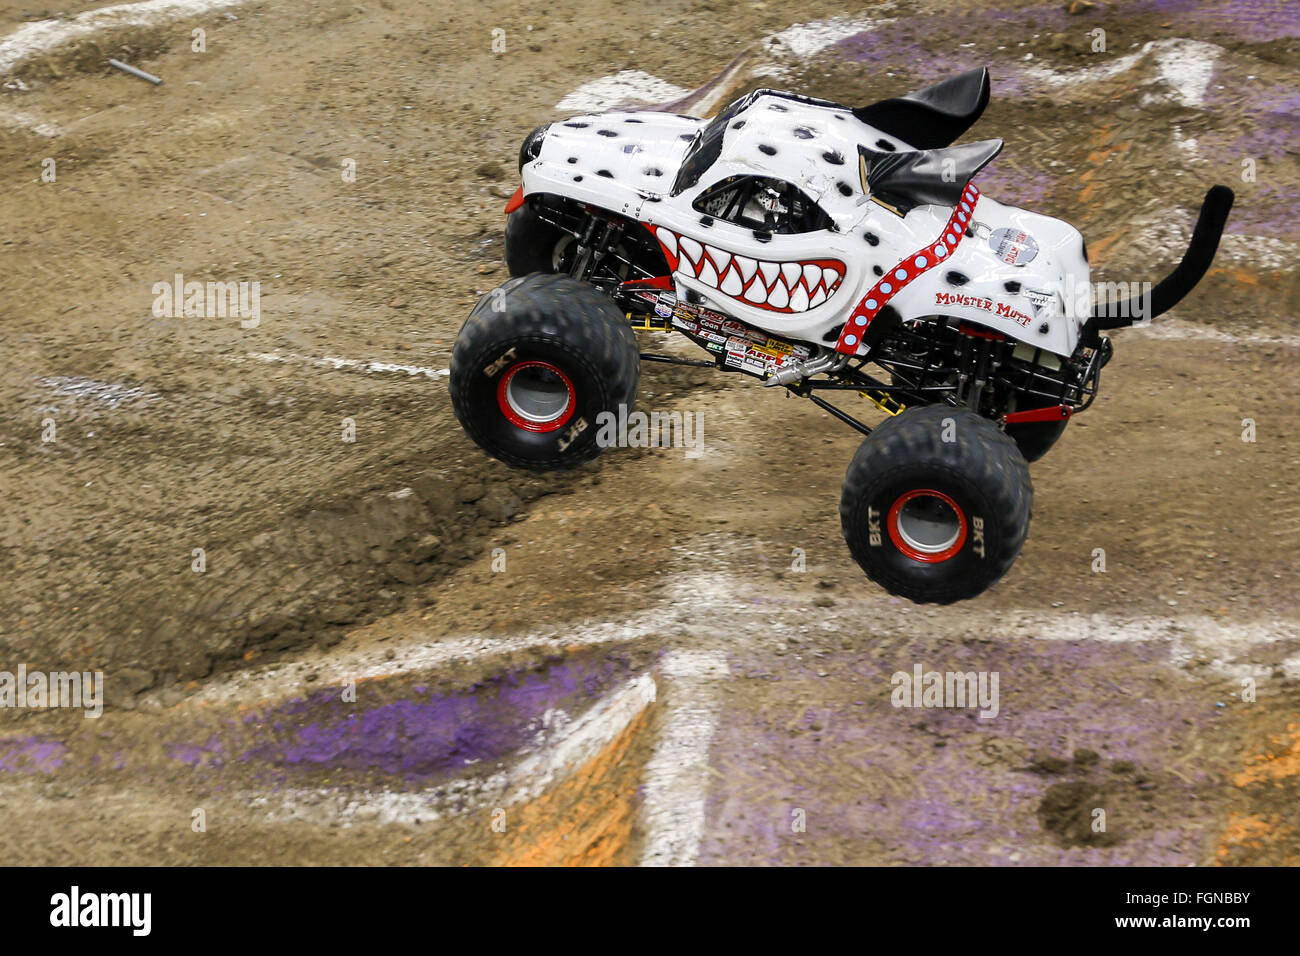 New Orleans, LA, USA. 20th Feb, 2016. Monster Mutt monster truck in action during Monster Jam at the Mercedes-Benz Superdome in New Orleans, LA. Stephen Lew/CSM/Alamy Live News Stock Photo